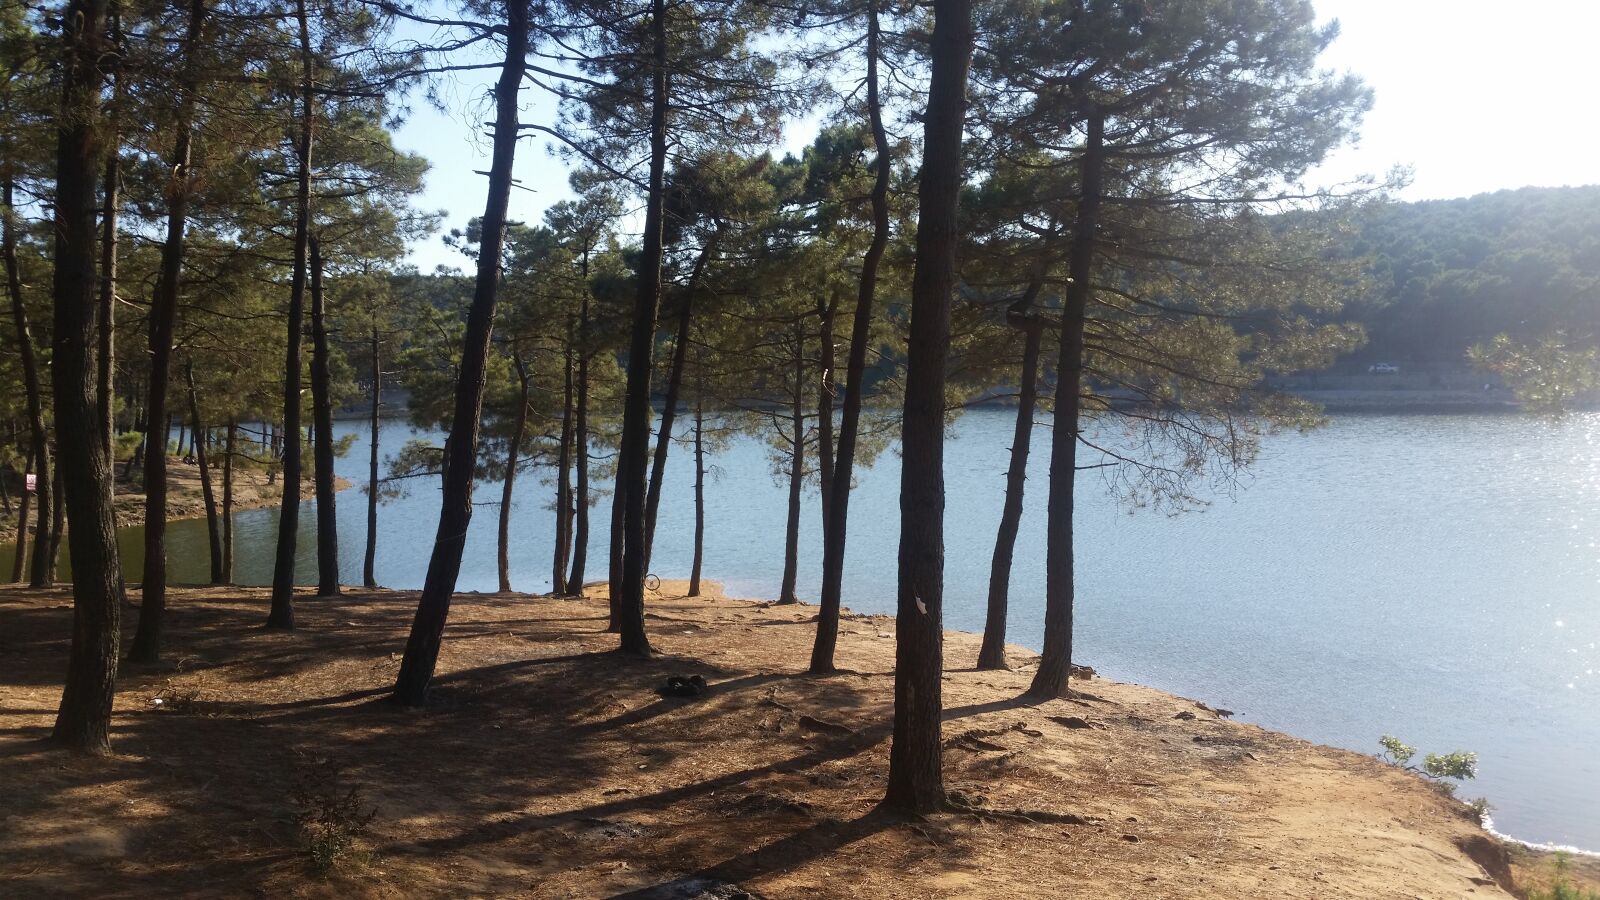 Samsung Galaxy S5 sample photo. Forest, lake, tree photography